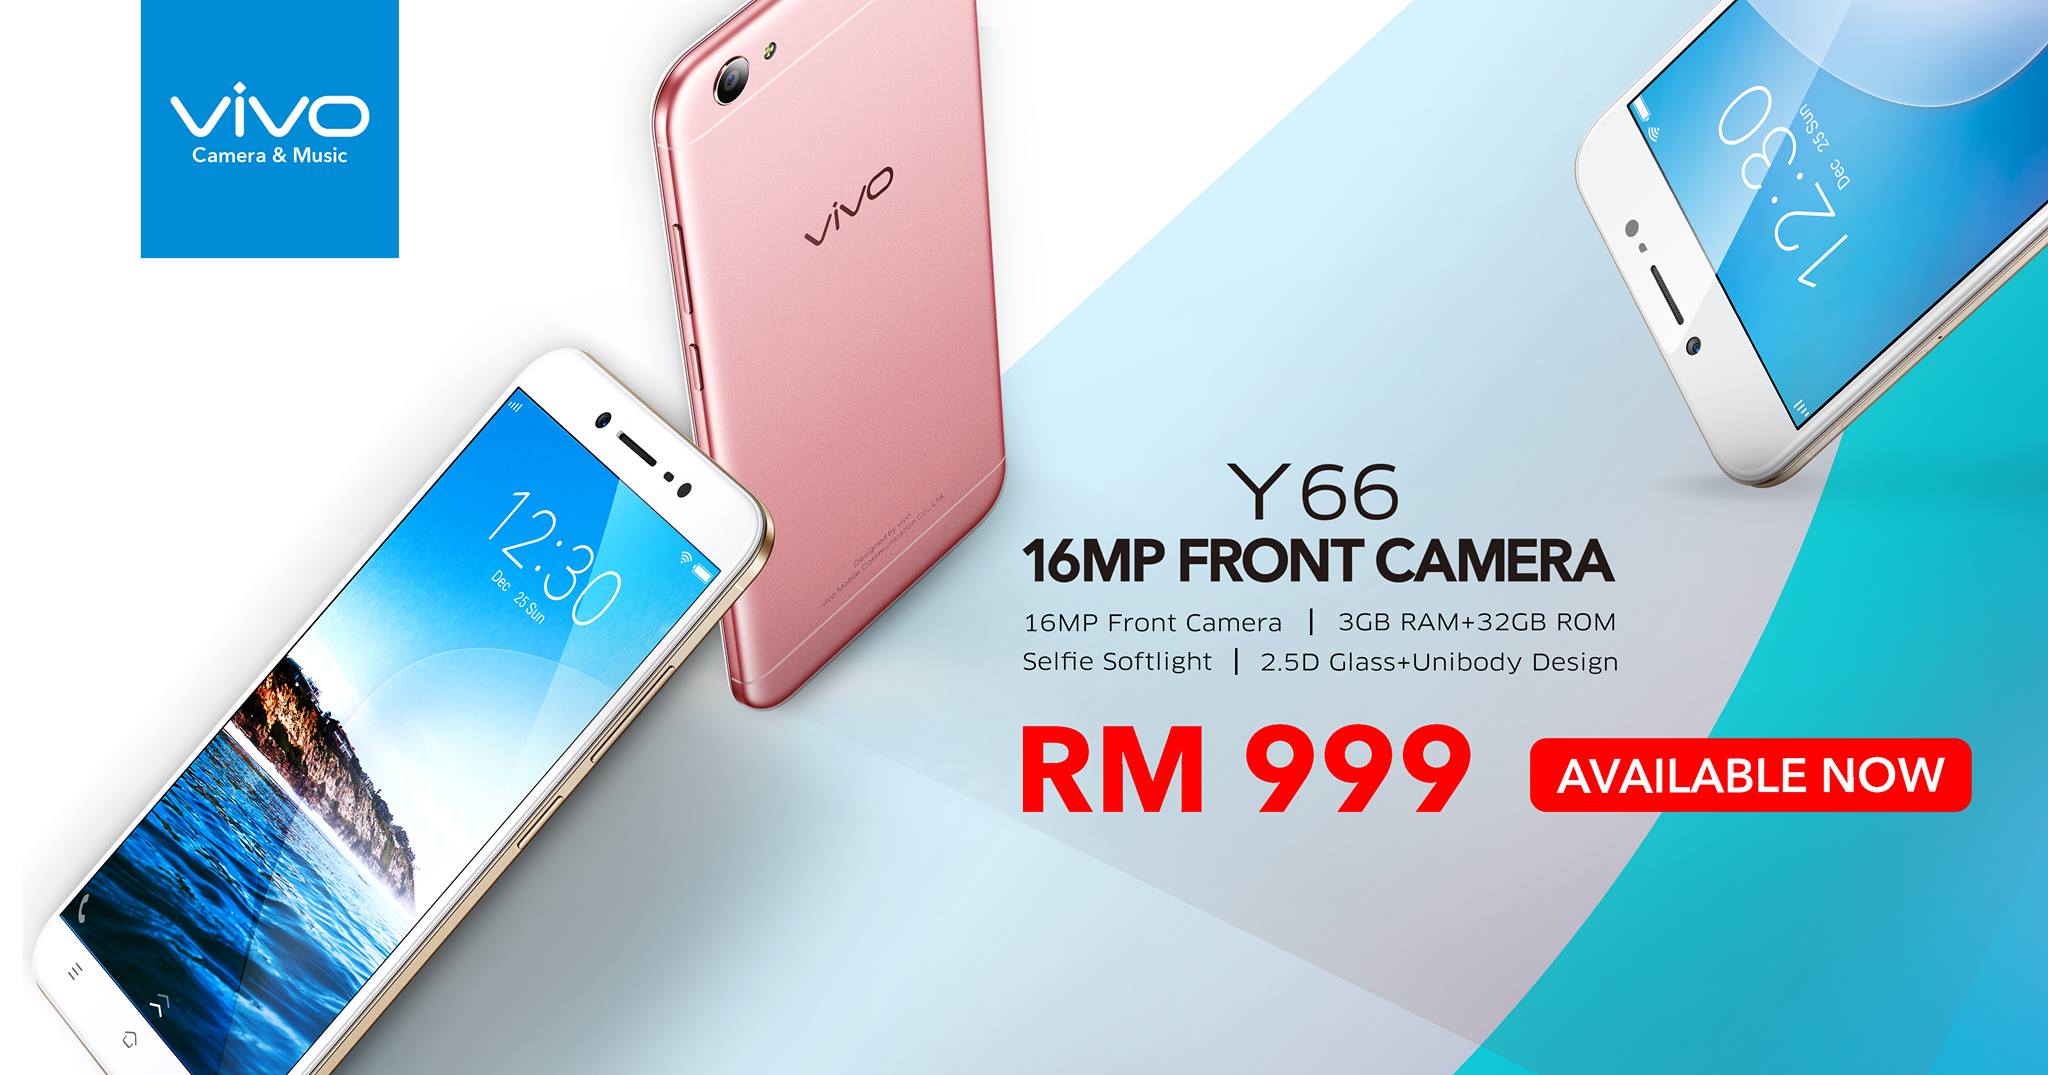 Vivo Y66 launched in Malaysia with RM 999 price tag